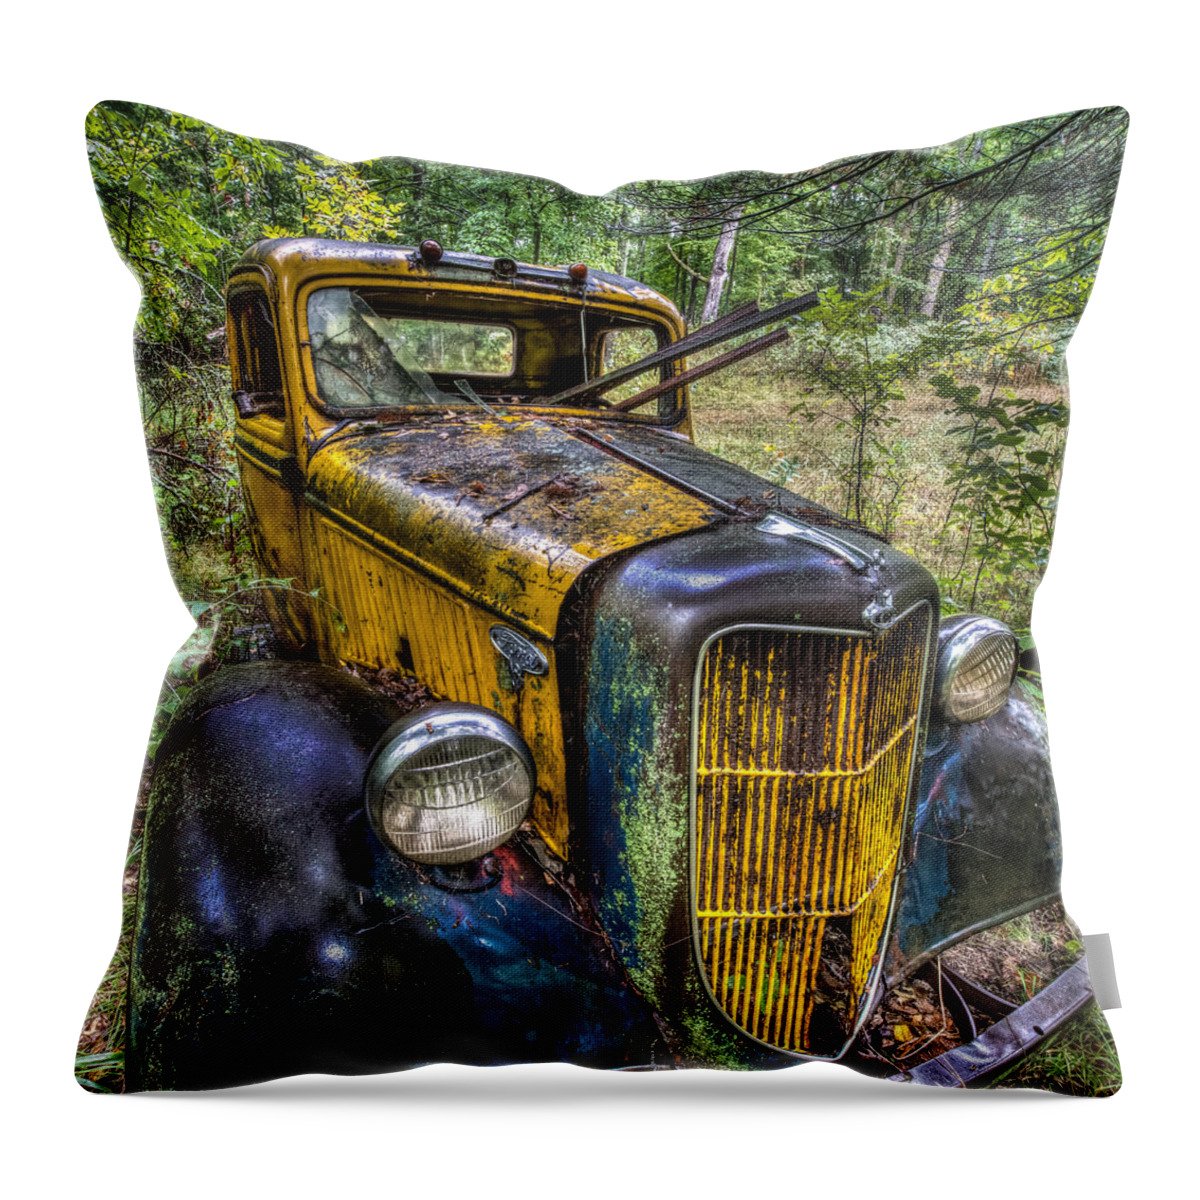 Rare Throw Pillow featuring the photograph Old Ford by Paul Freidlund